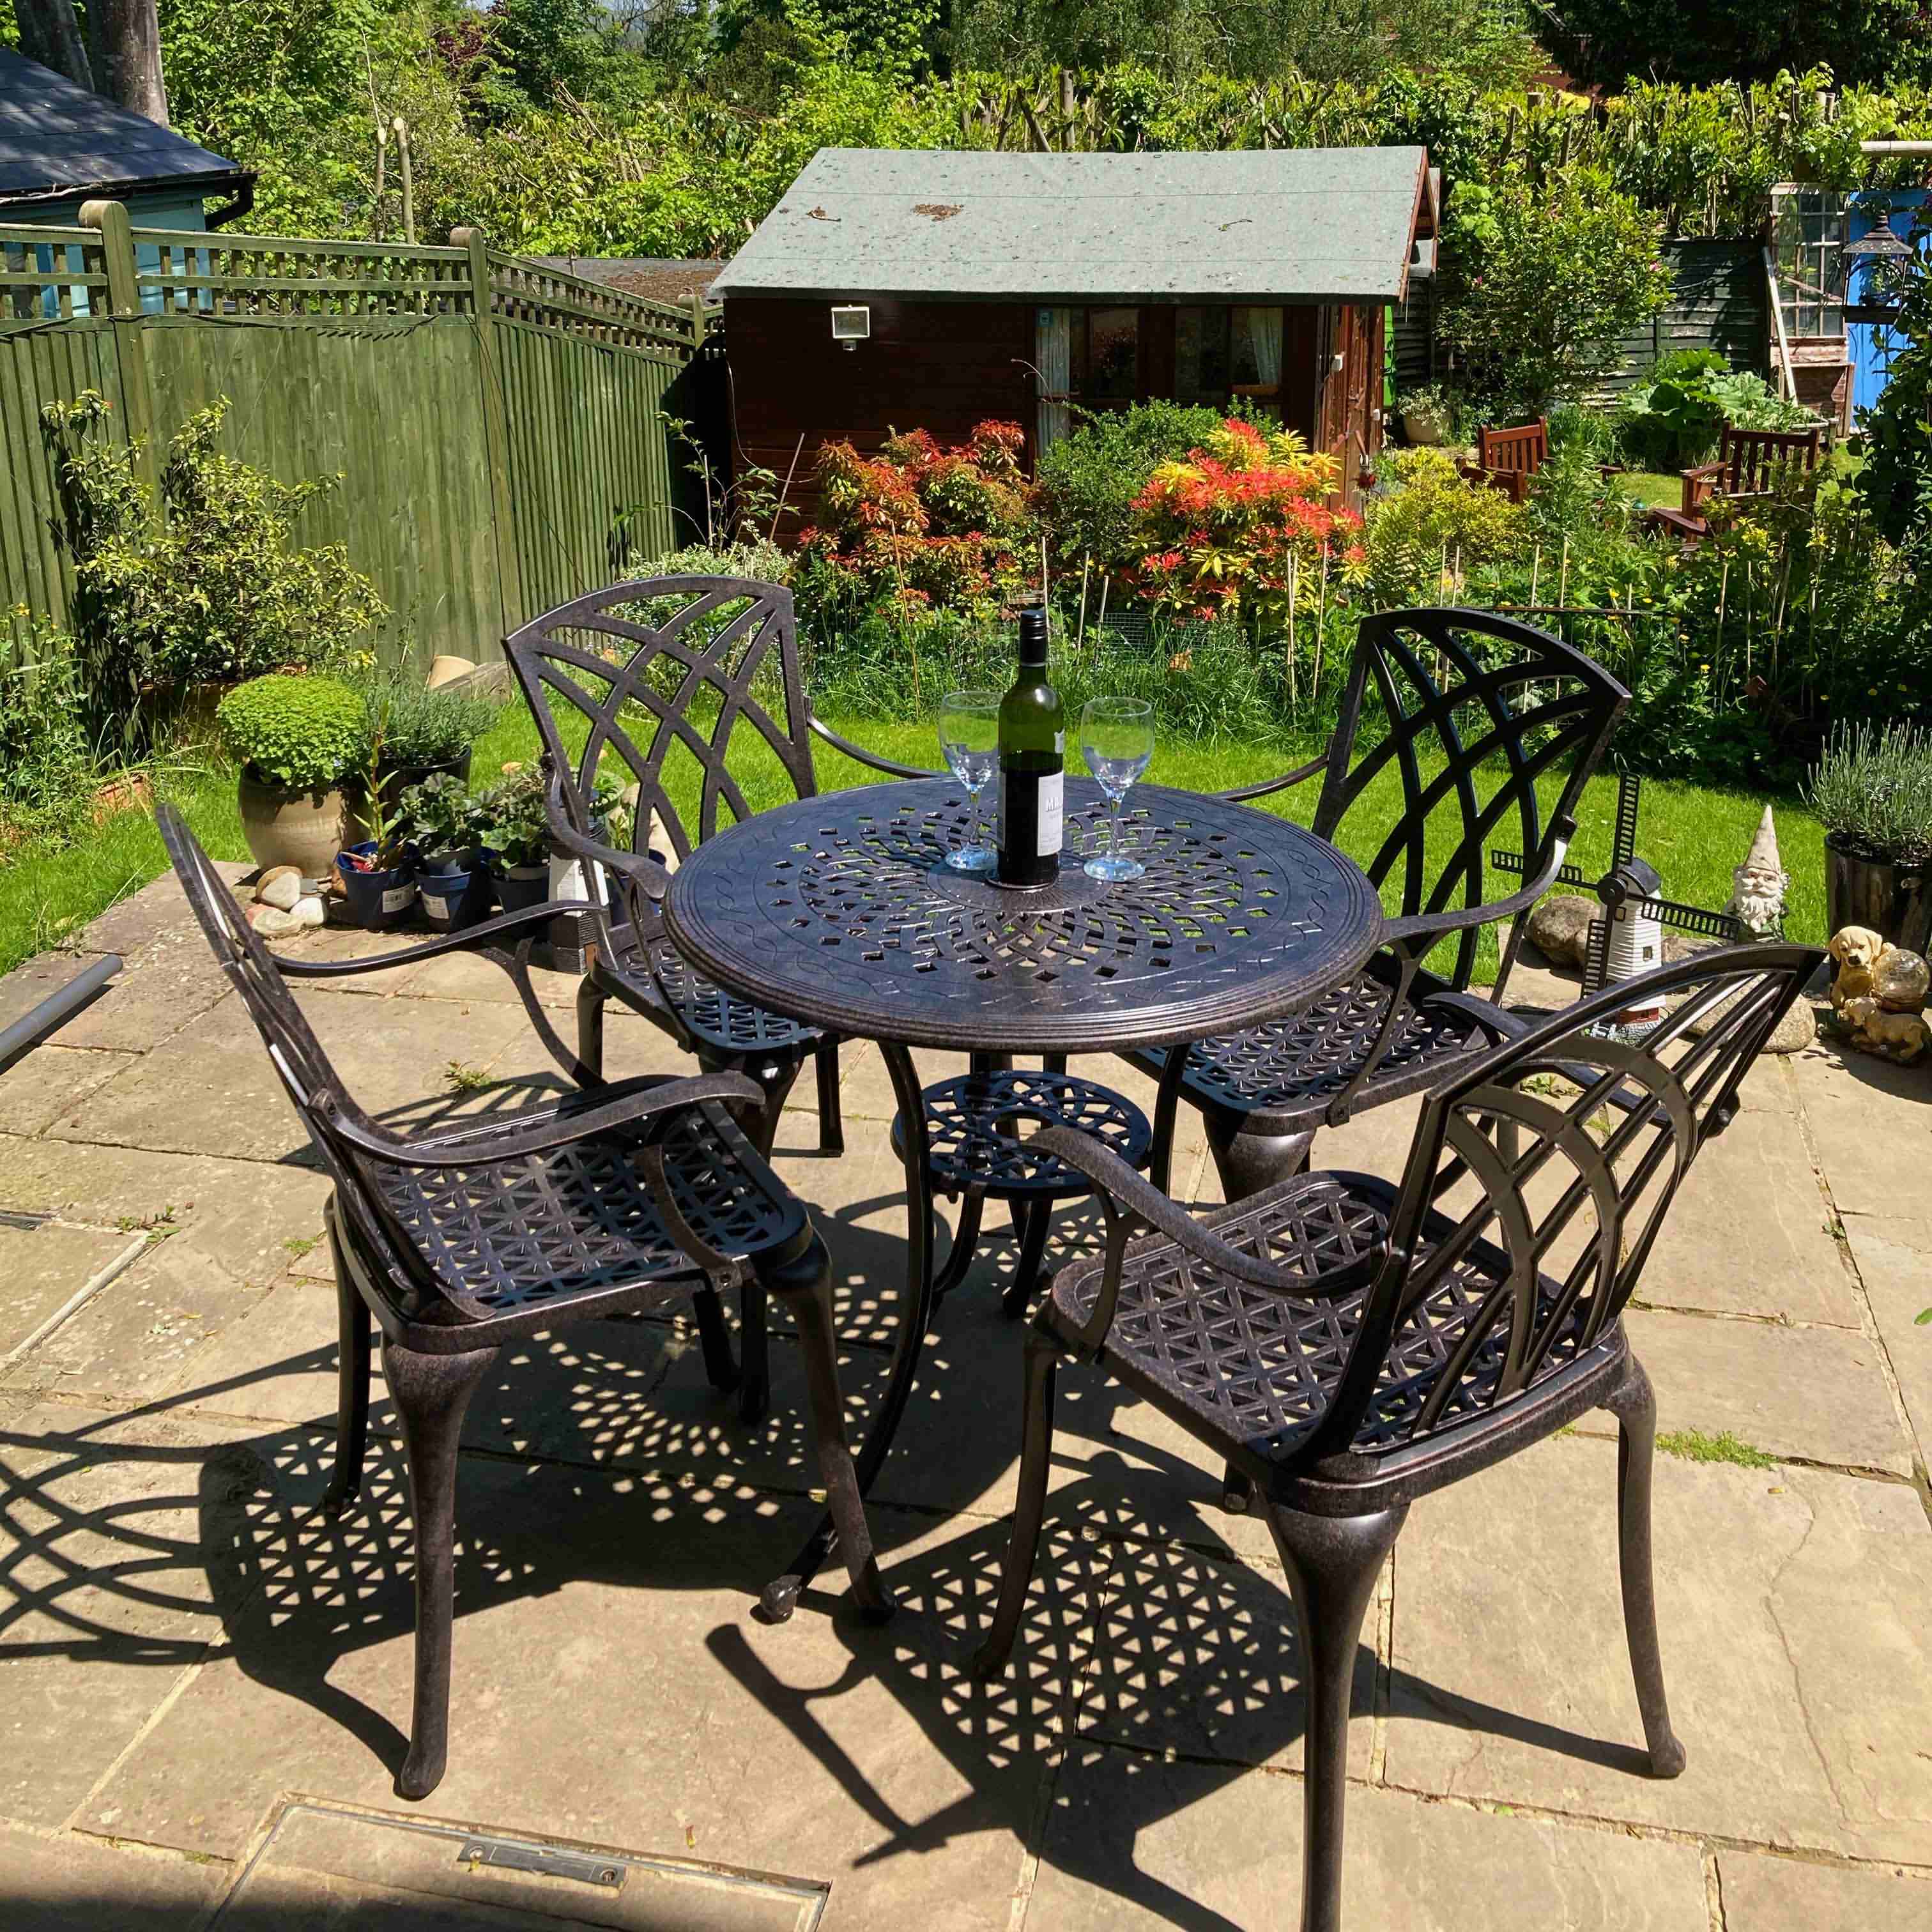 & 4 Lazy | Set Chairs - Bronze Small Anna Susan Patio Table